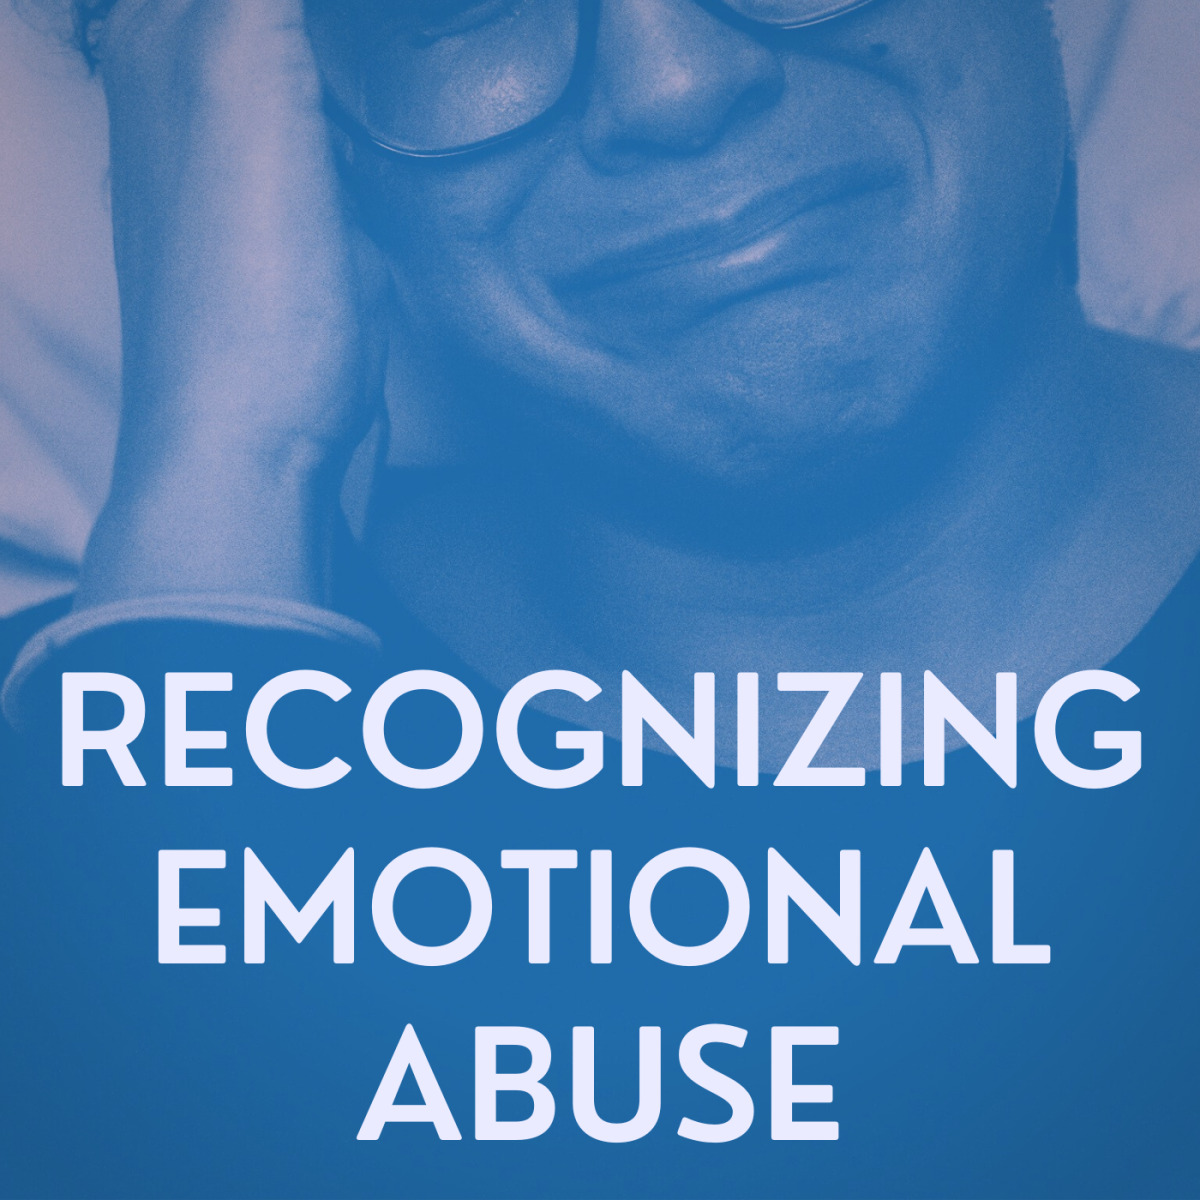 All couples argue at times, but it doesn't have to be hurtful or traumatic. Learn to recognize the signs of emotional abuse.